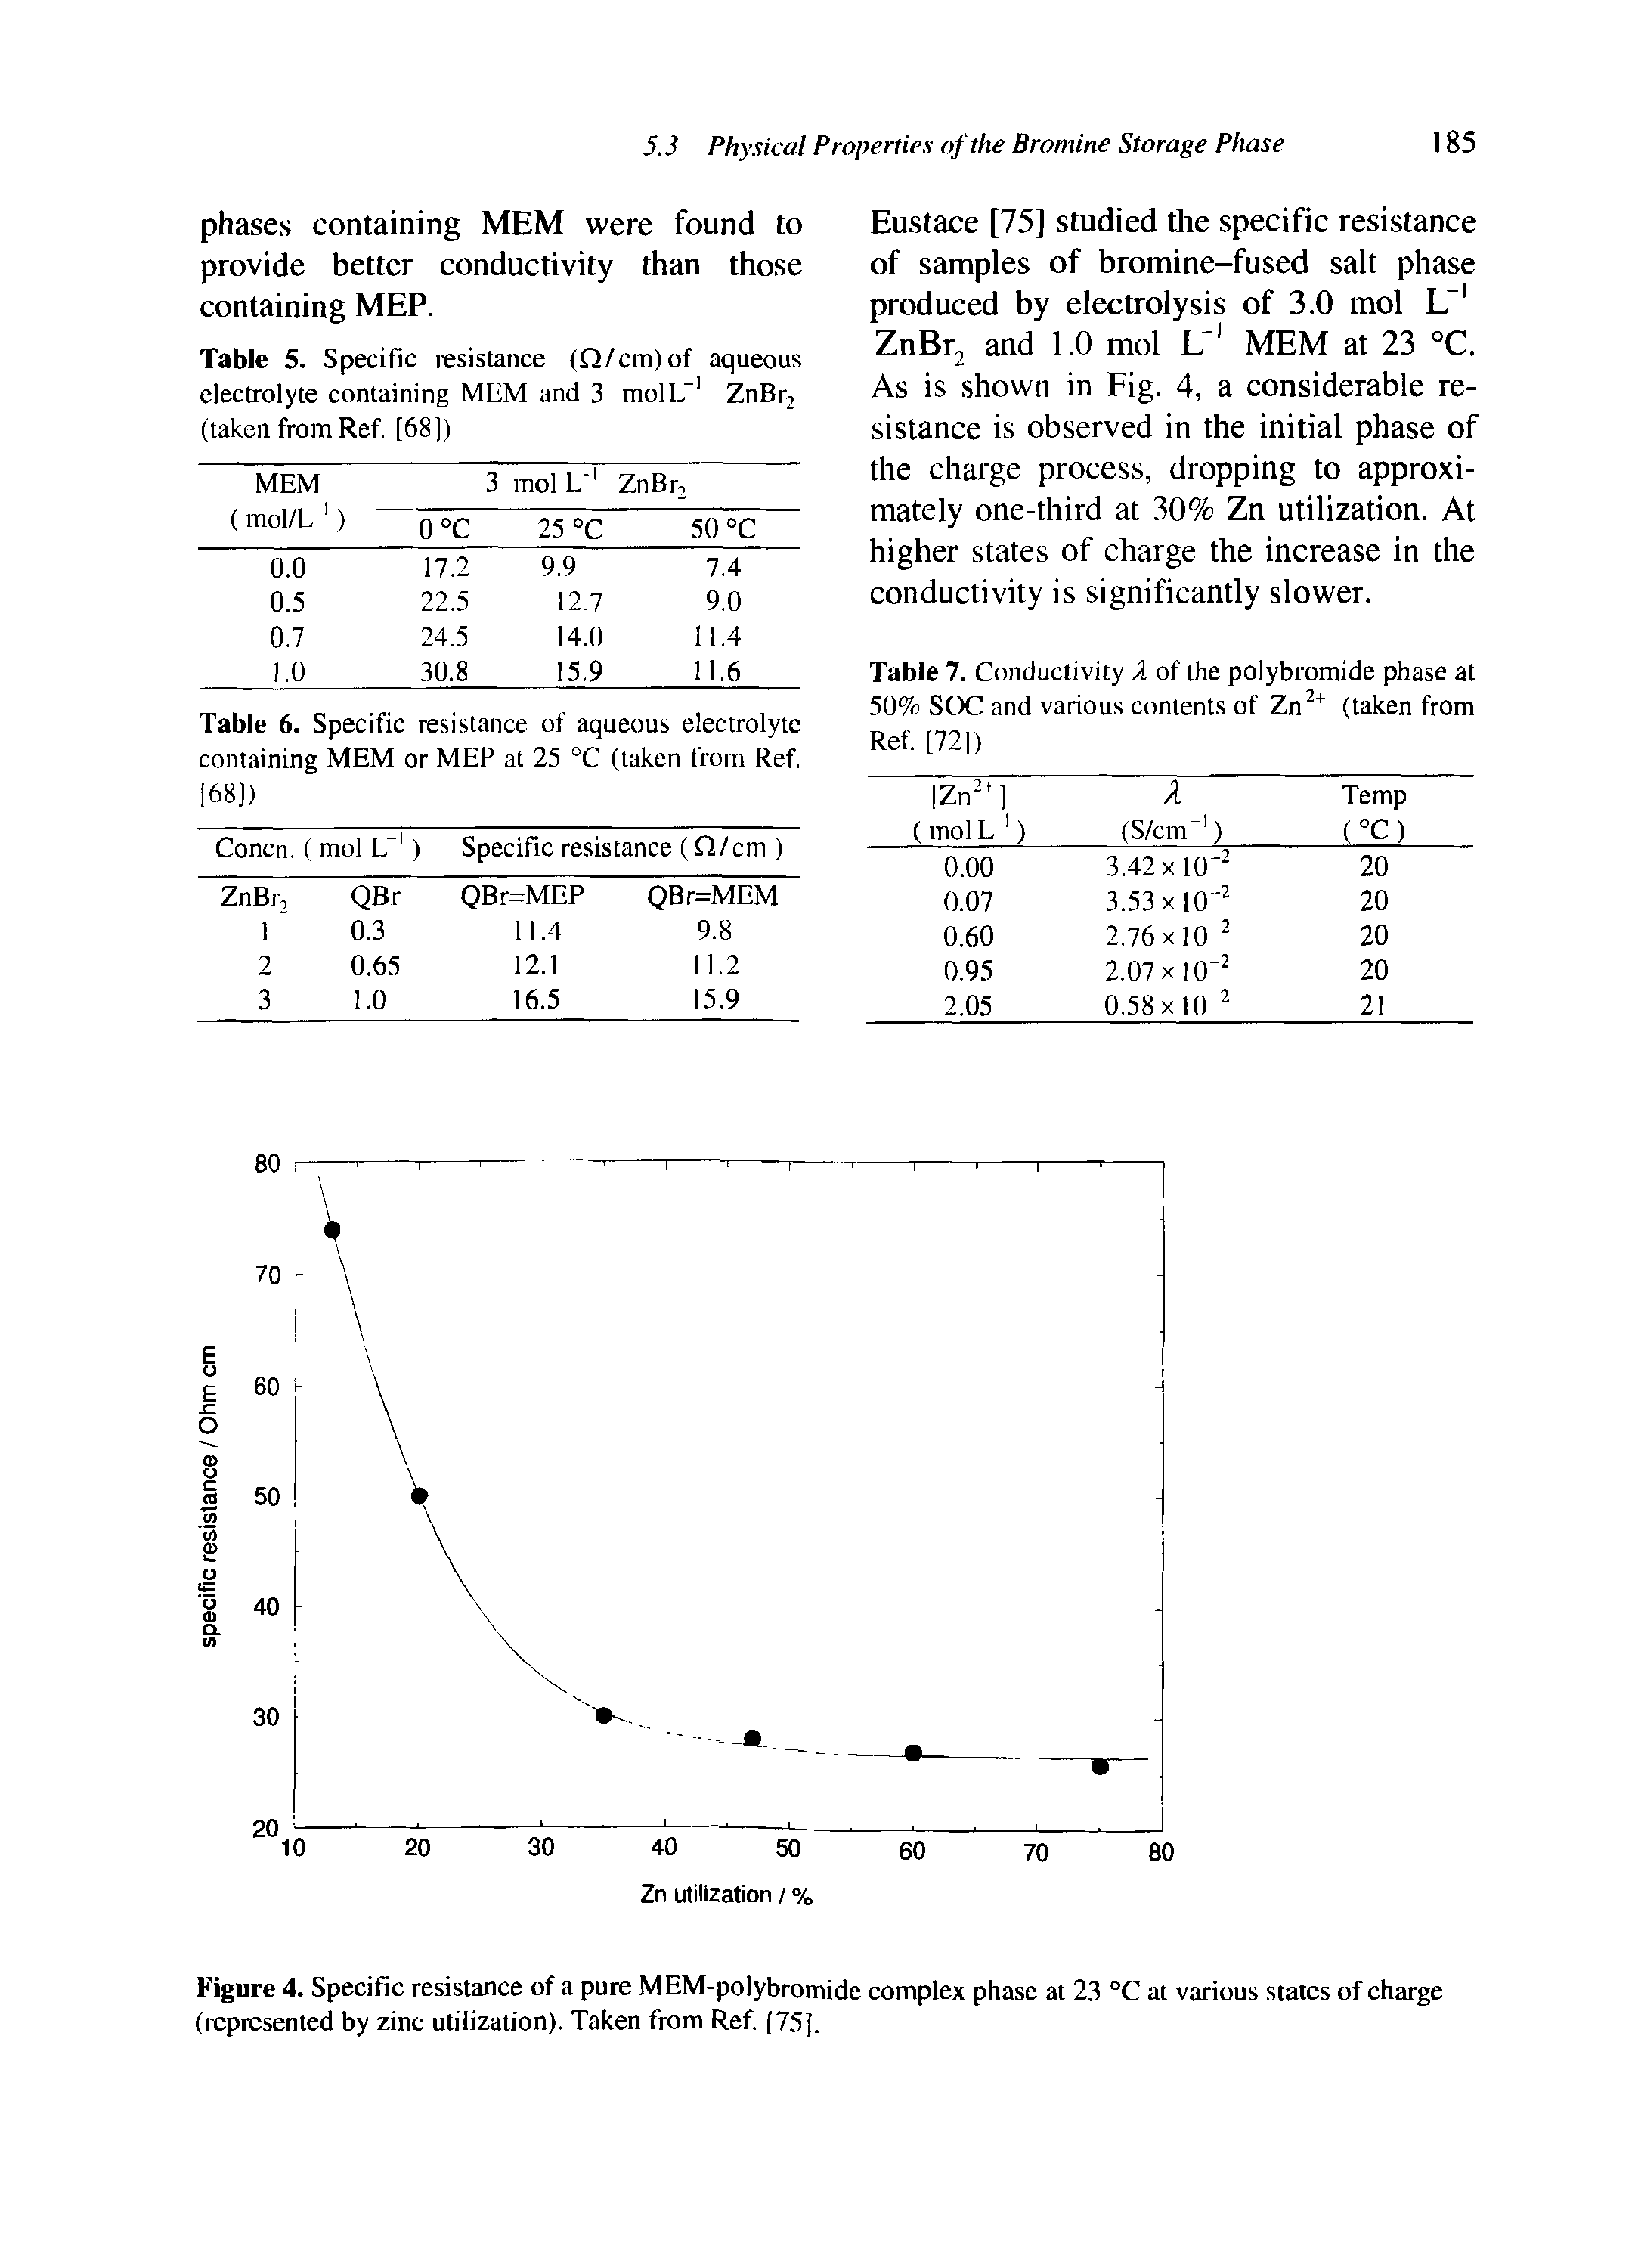 Figure 4. Specific resistance of a pure MEM-polybromide complex phase at 23 °C at various states of charge (represented by zinc utilization). Taken from Ref. [75],...